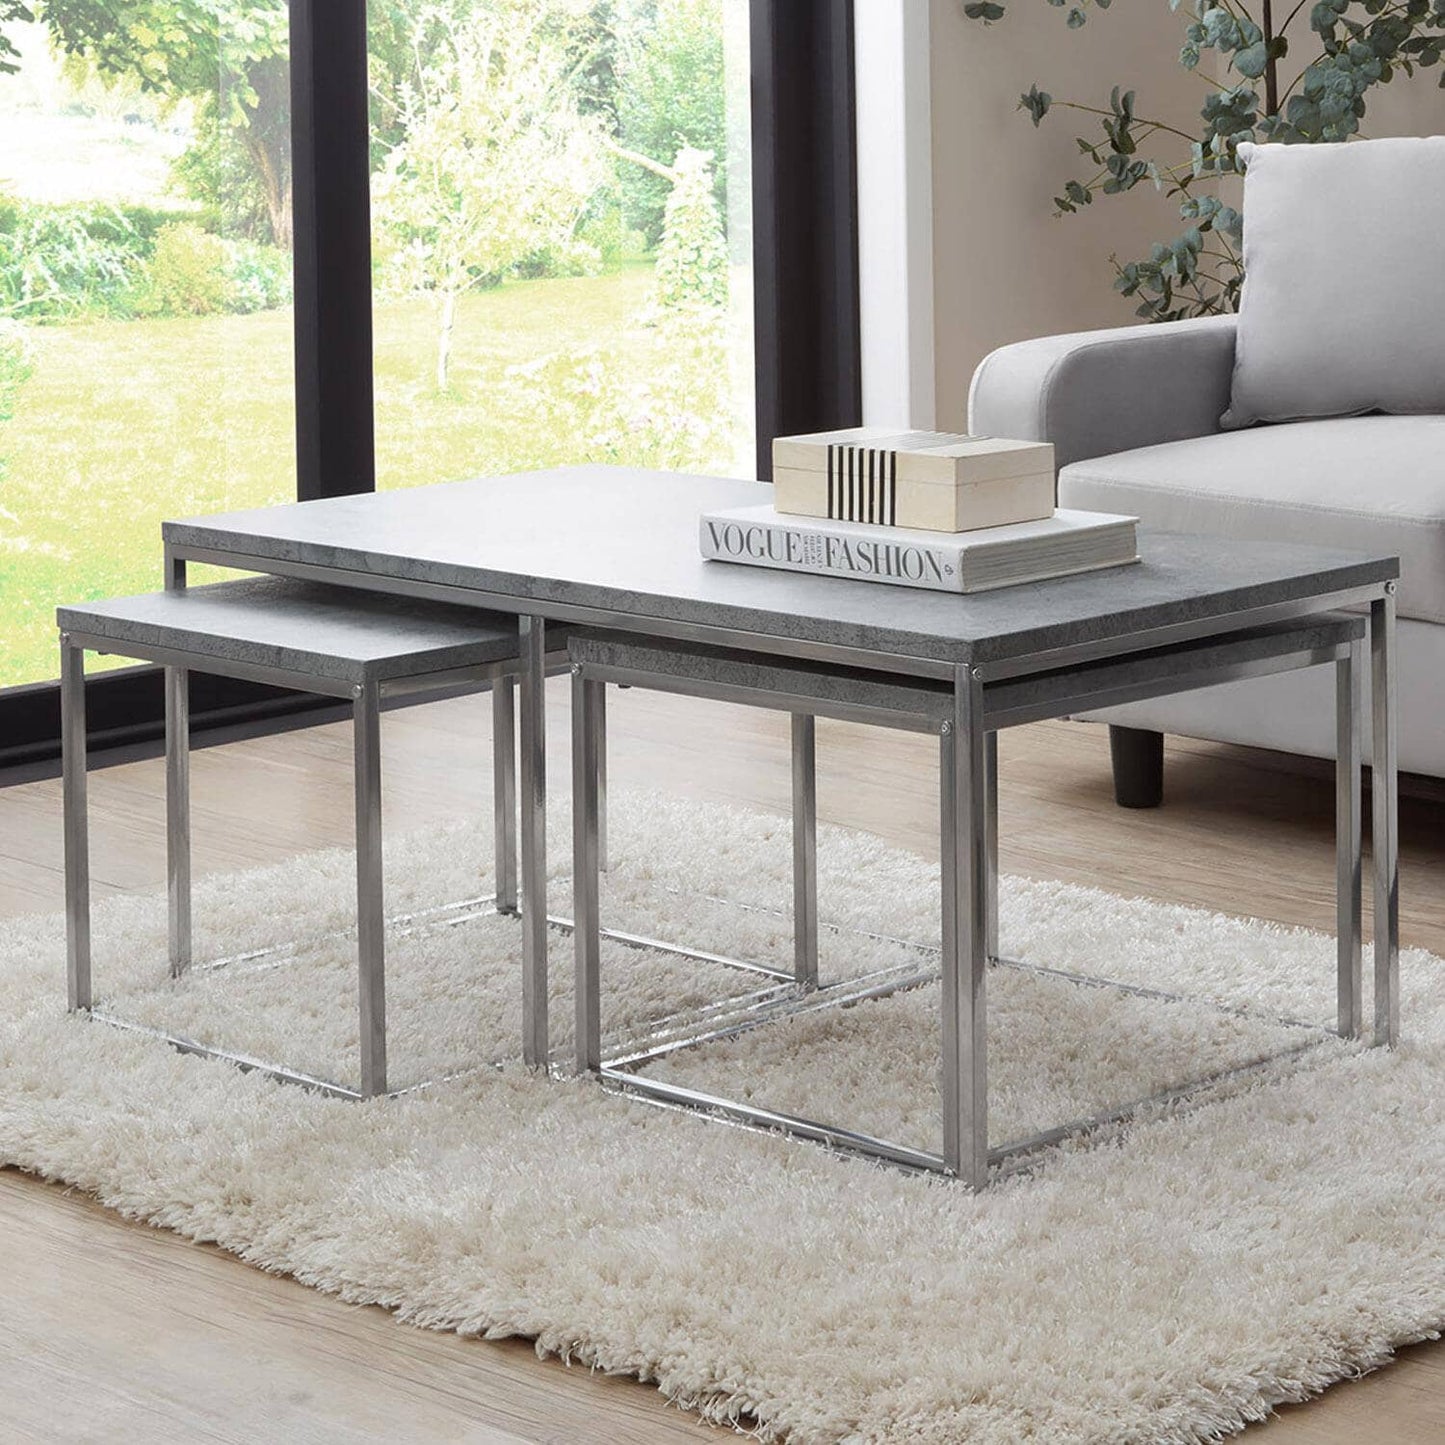 Jay coffee table and side table set - concrete effect and chrome